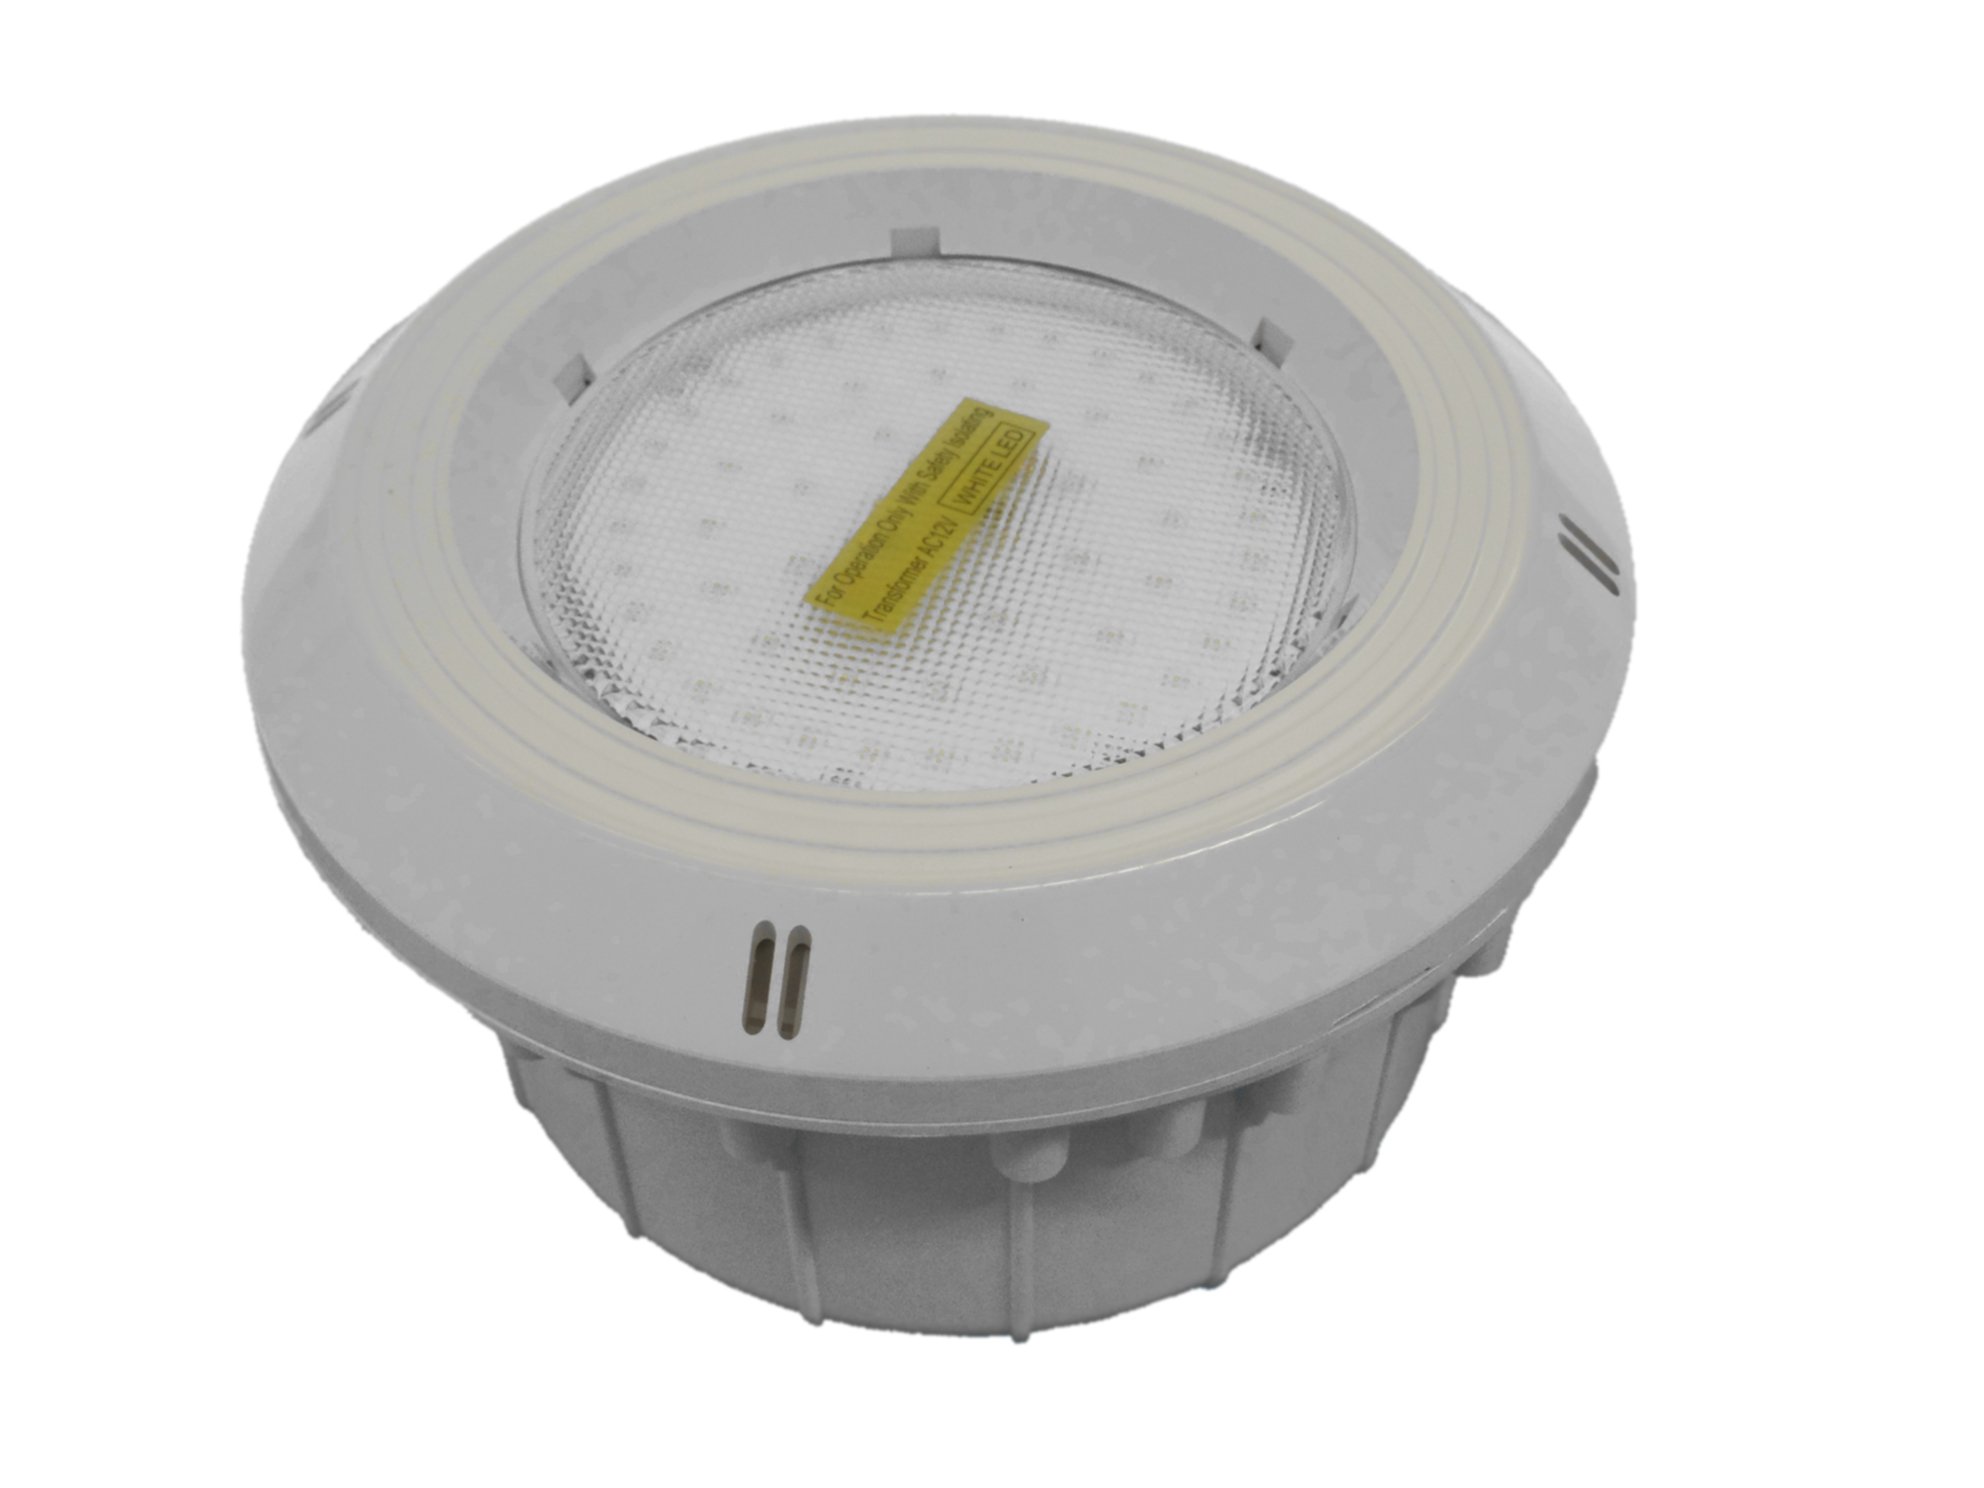 Proyector luz led para piscinas Liner - Geosynt